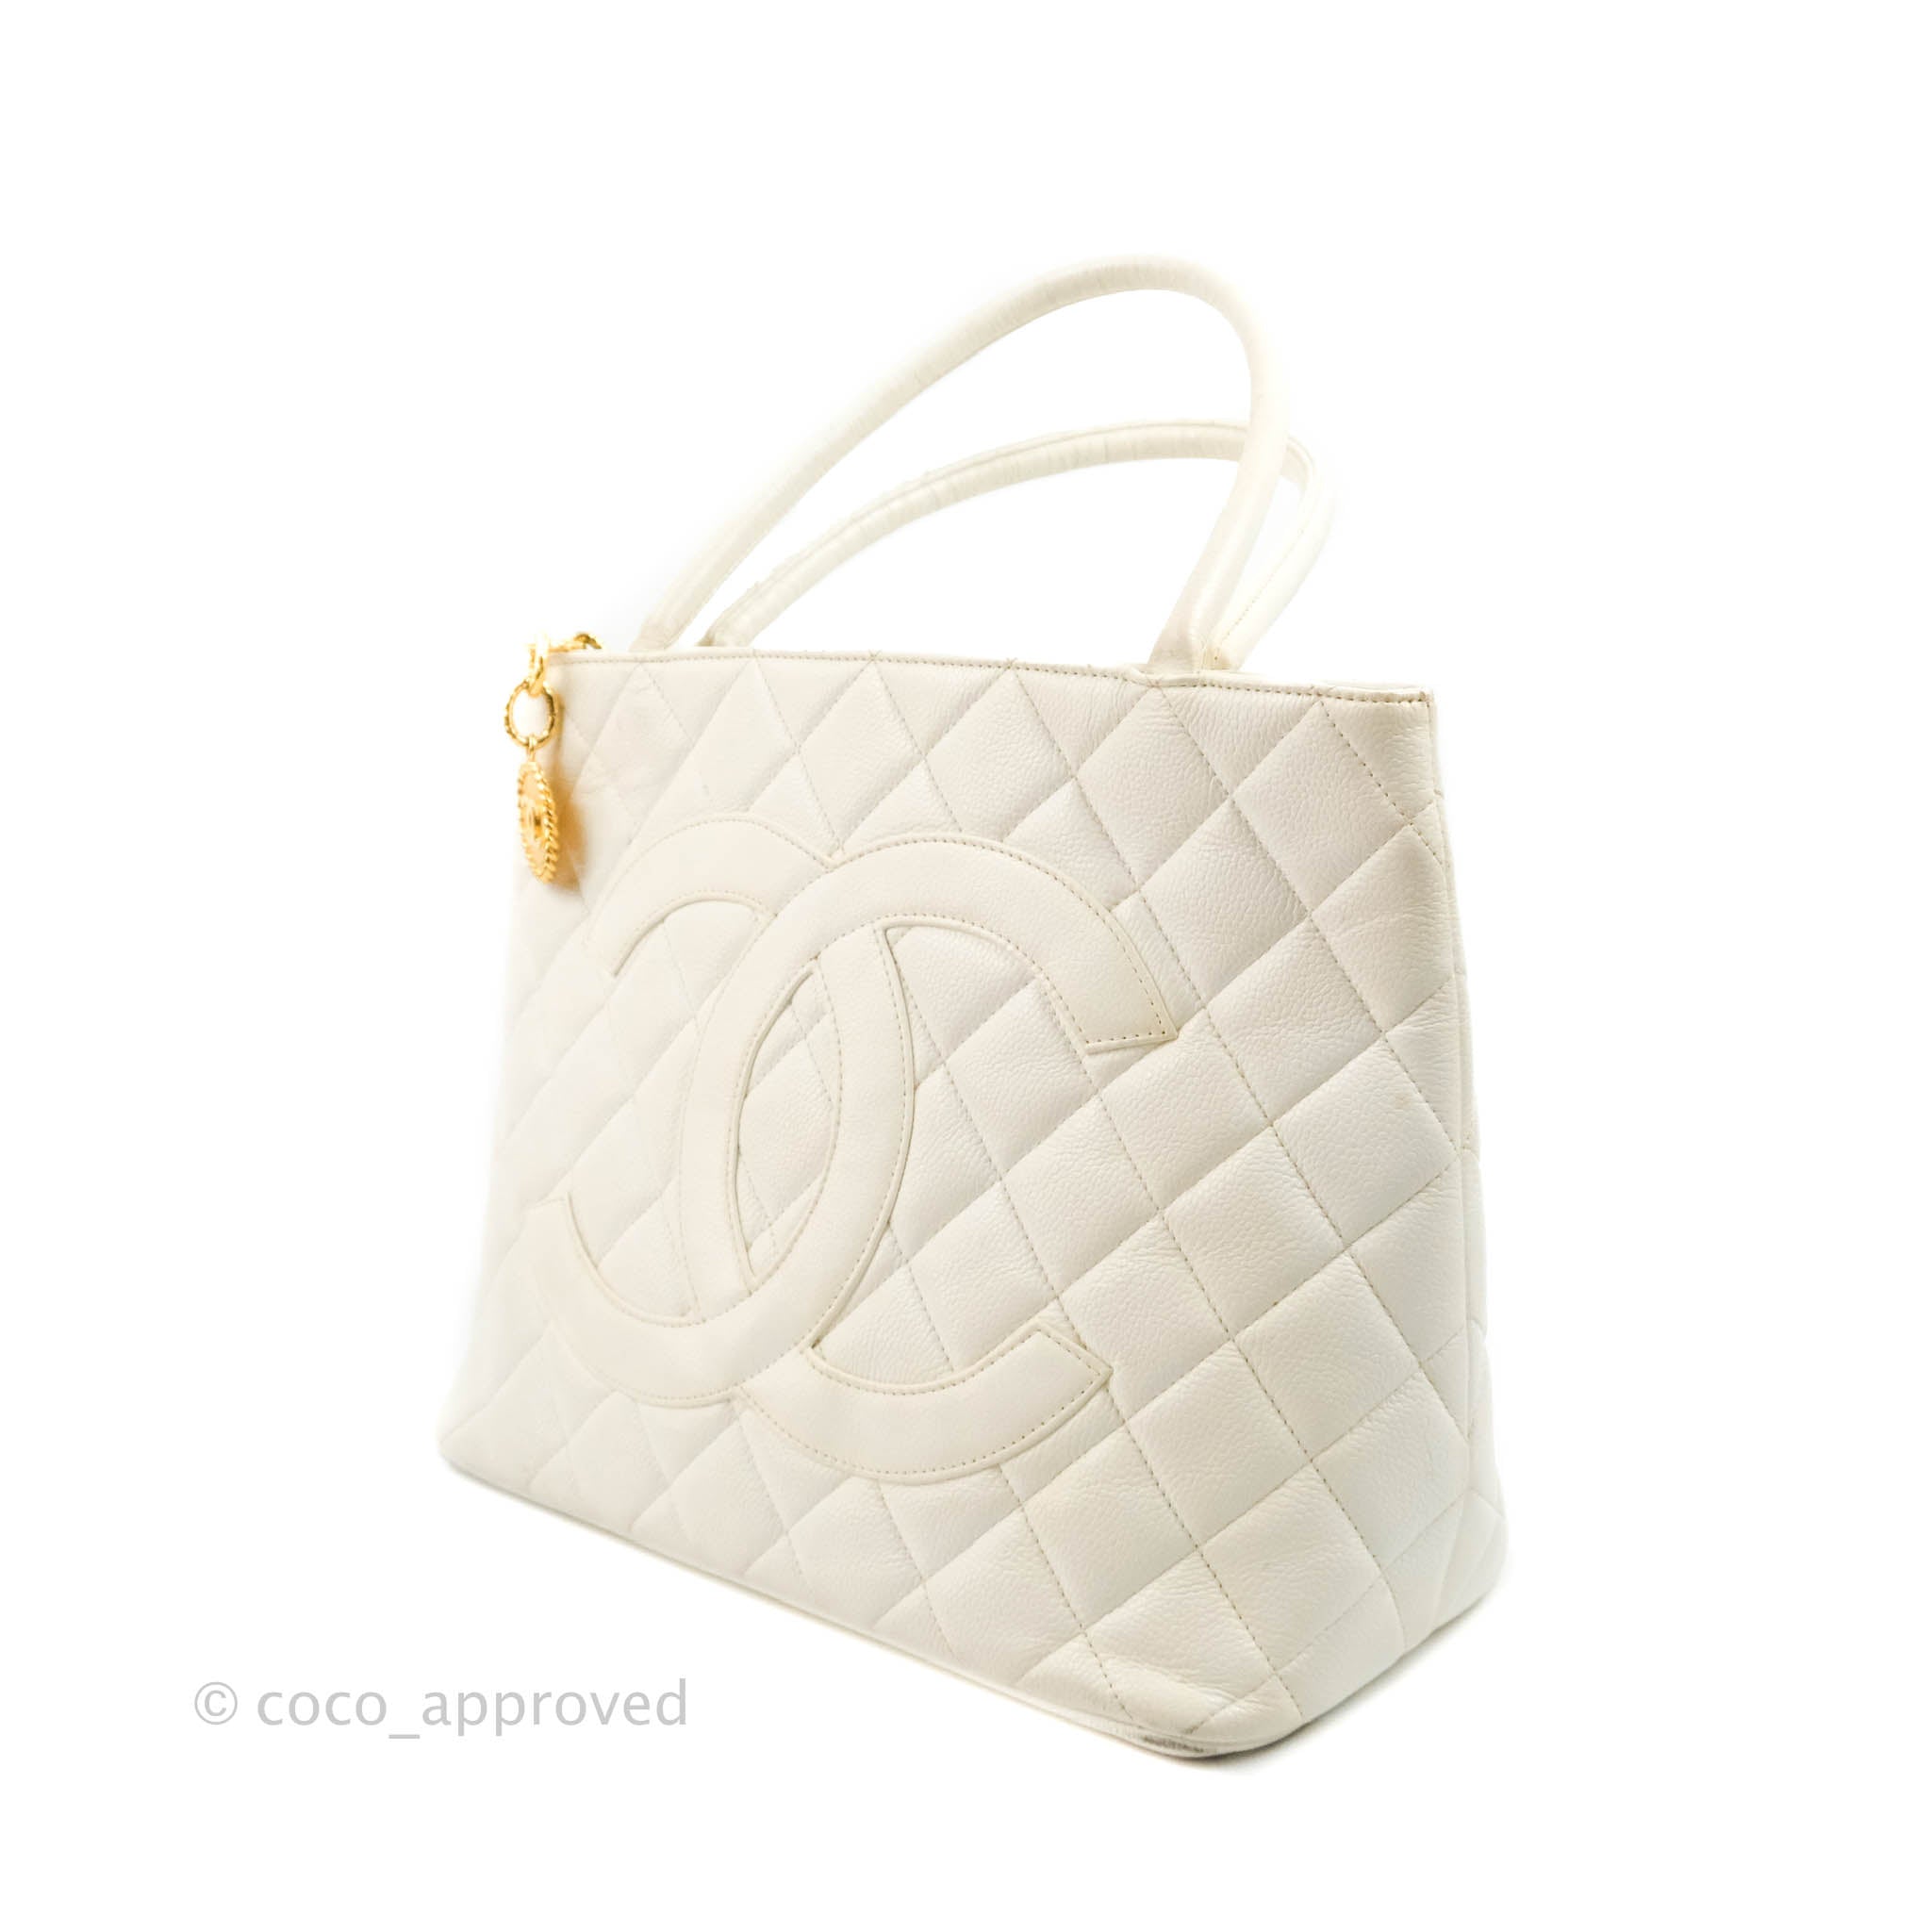 CHANEL, Bags, Chanel Lavender Classic Medallion Tote